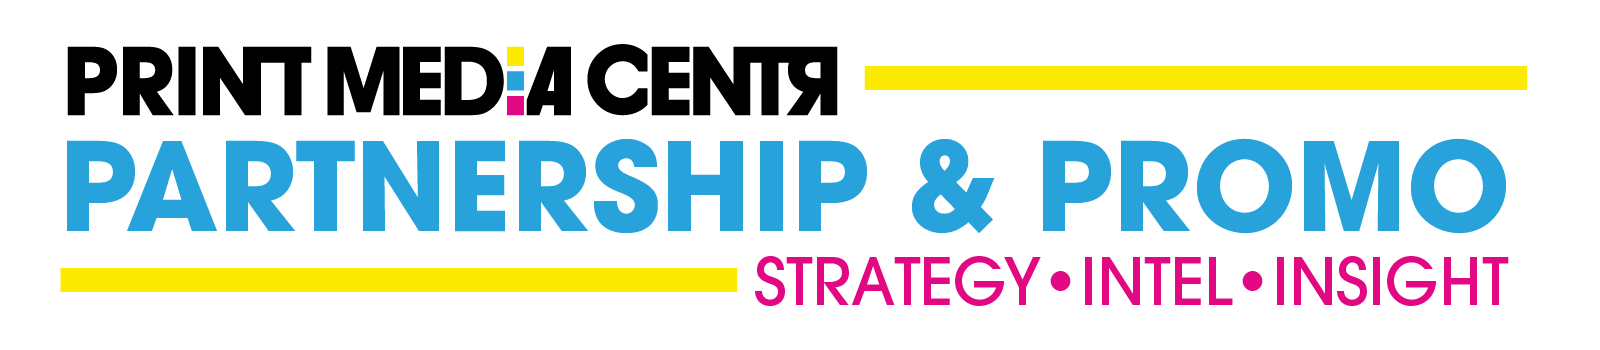 a logo for partnership and promotional opportunities with print media centr